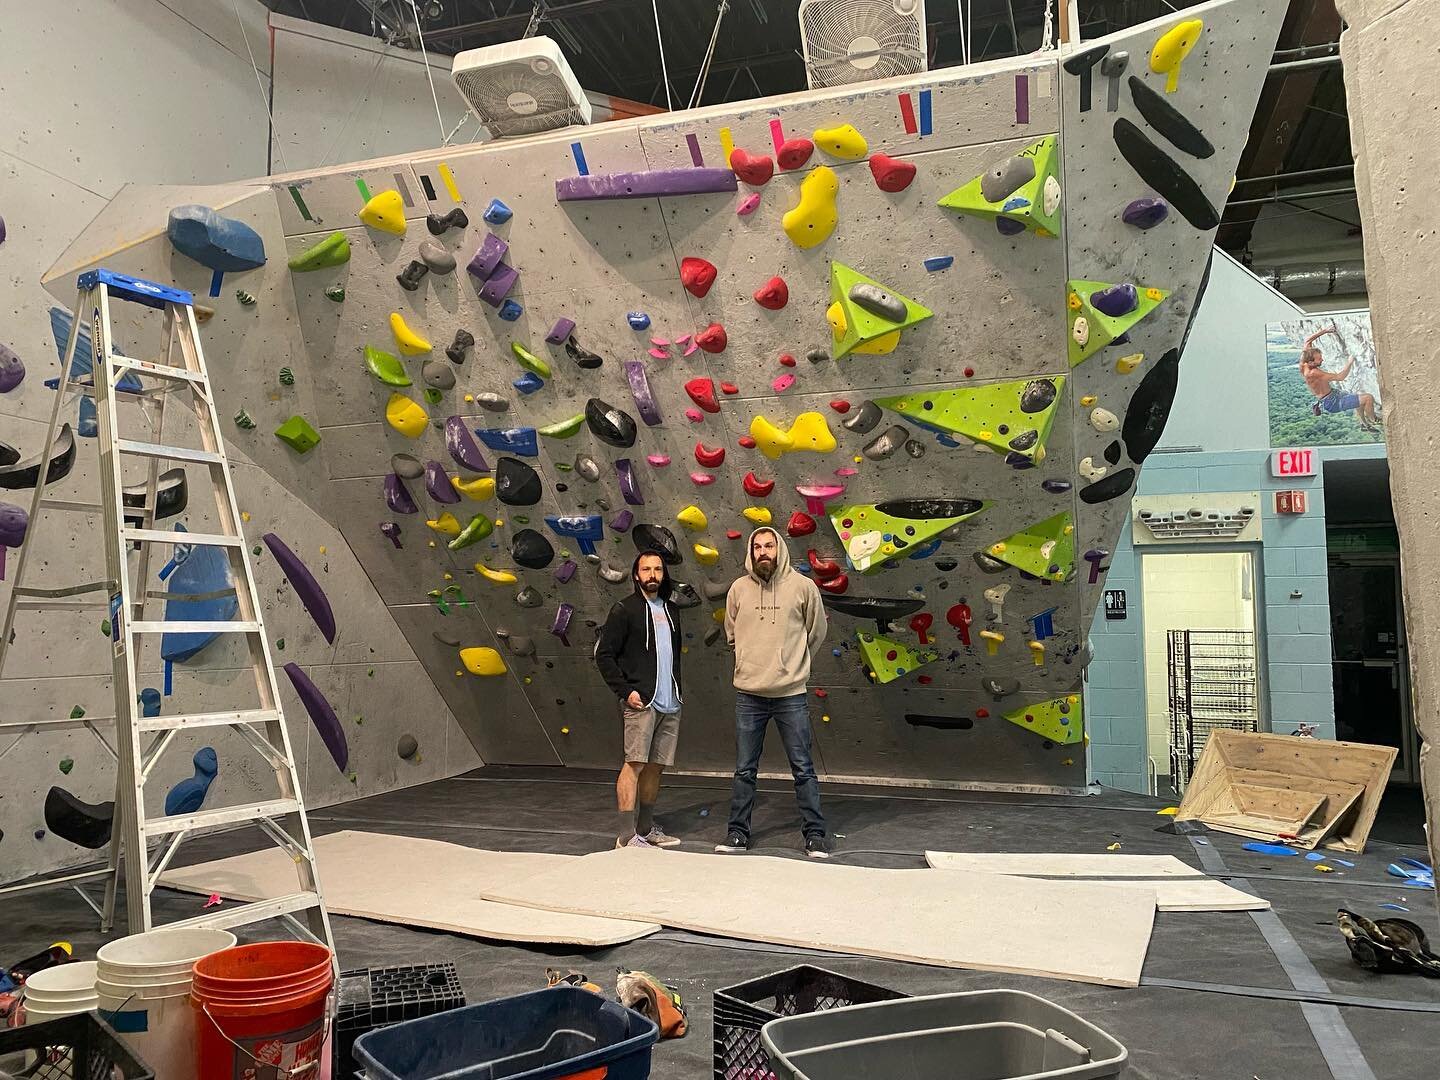 Excited to have this 45&deg; set brought to you by the two principal setters from @gp_eighty_one, considered one of the best set bouldering gyms on the East Coast.

Enjoy!

#varietyofsettingstyles
#bcclimbinggym